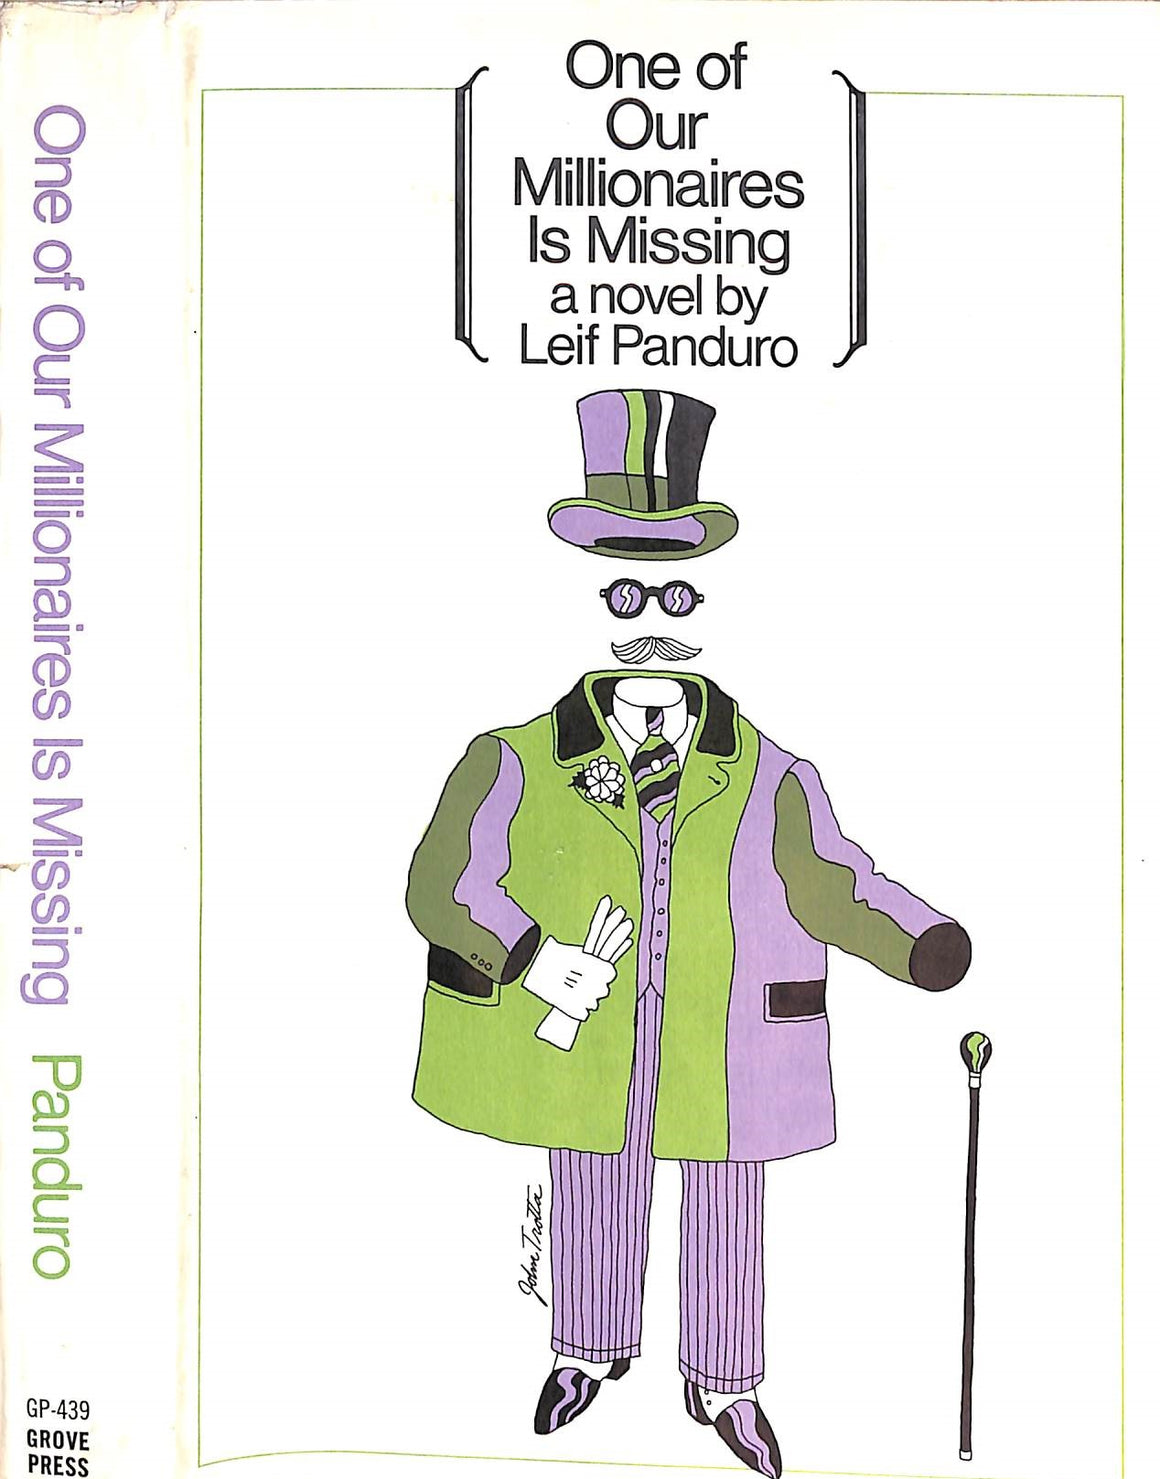 "One Of Our Millionaires Is Missing" 1967 PANDURO, Leif